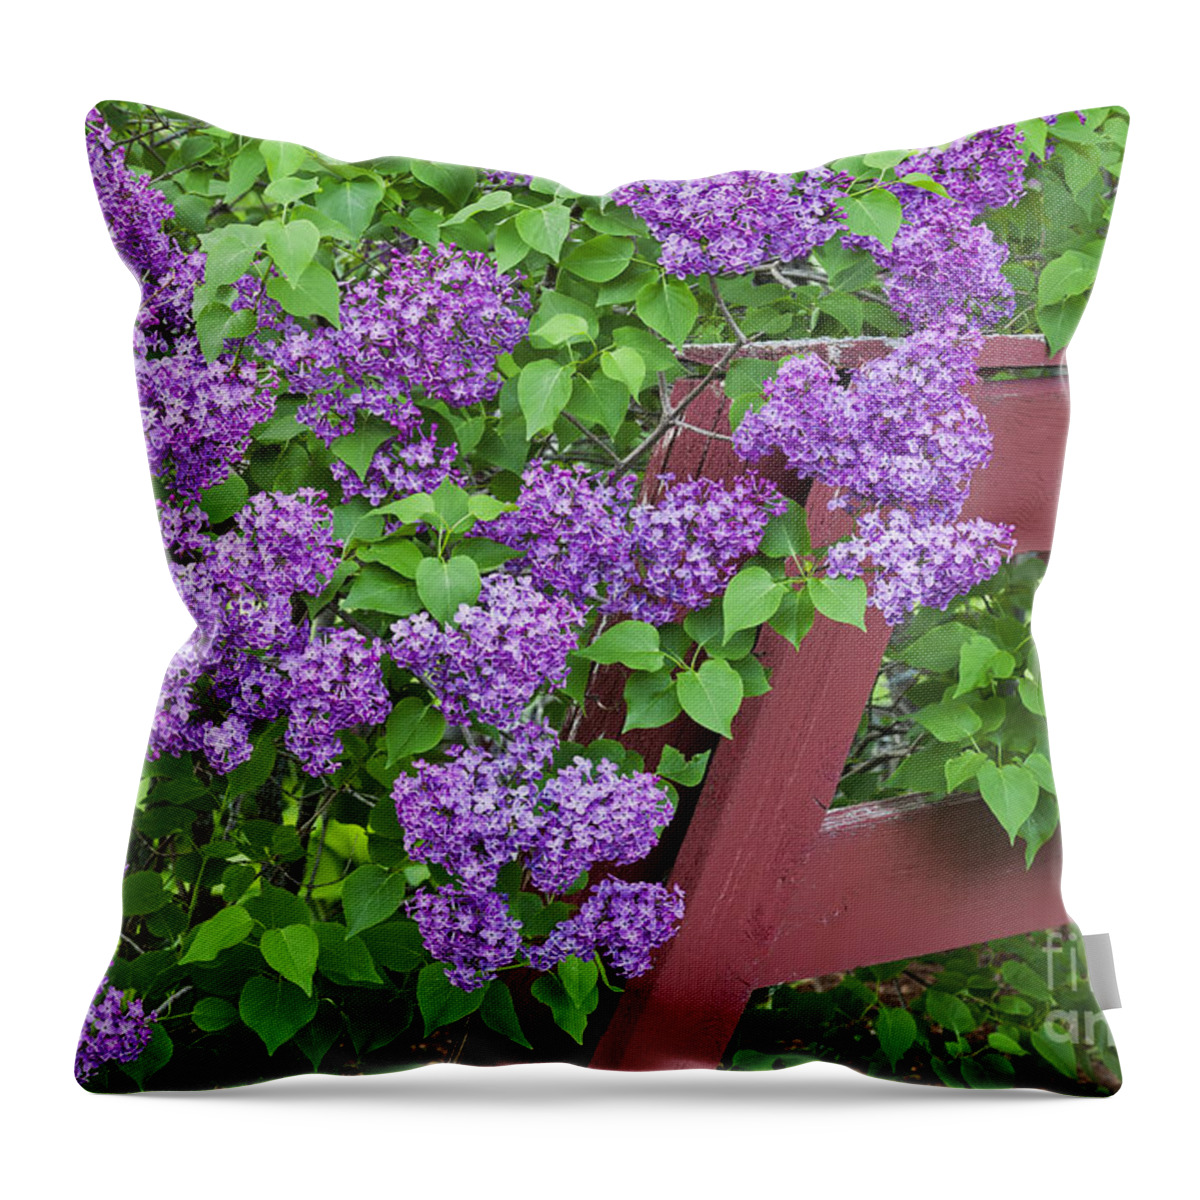 Spring Throw Pillow featuring the photograph Lilac Profusion by Alan L Graham